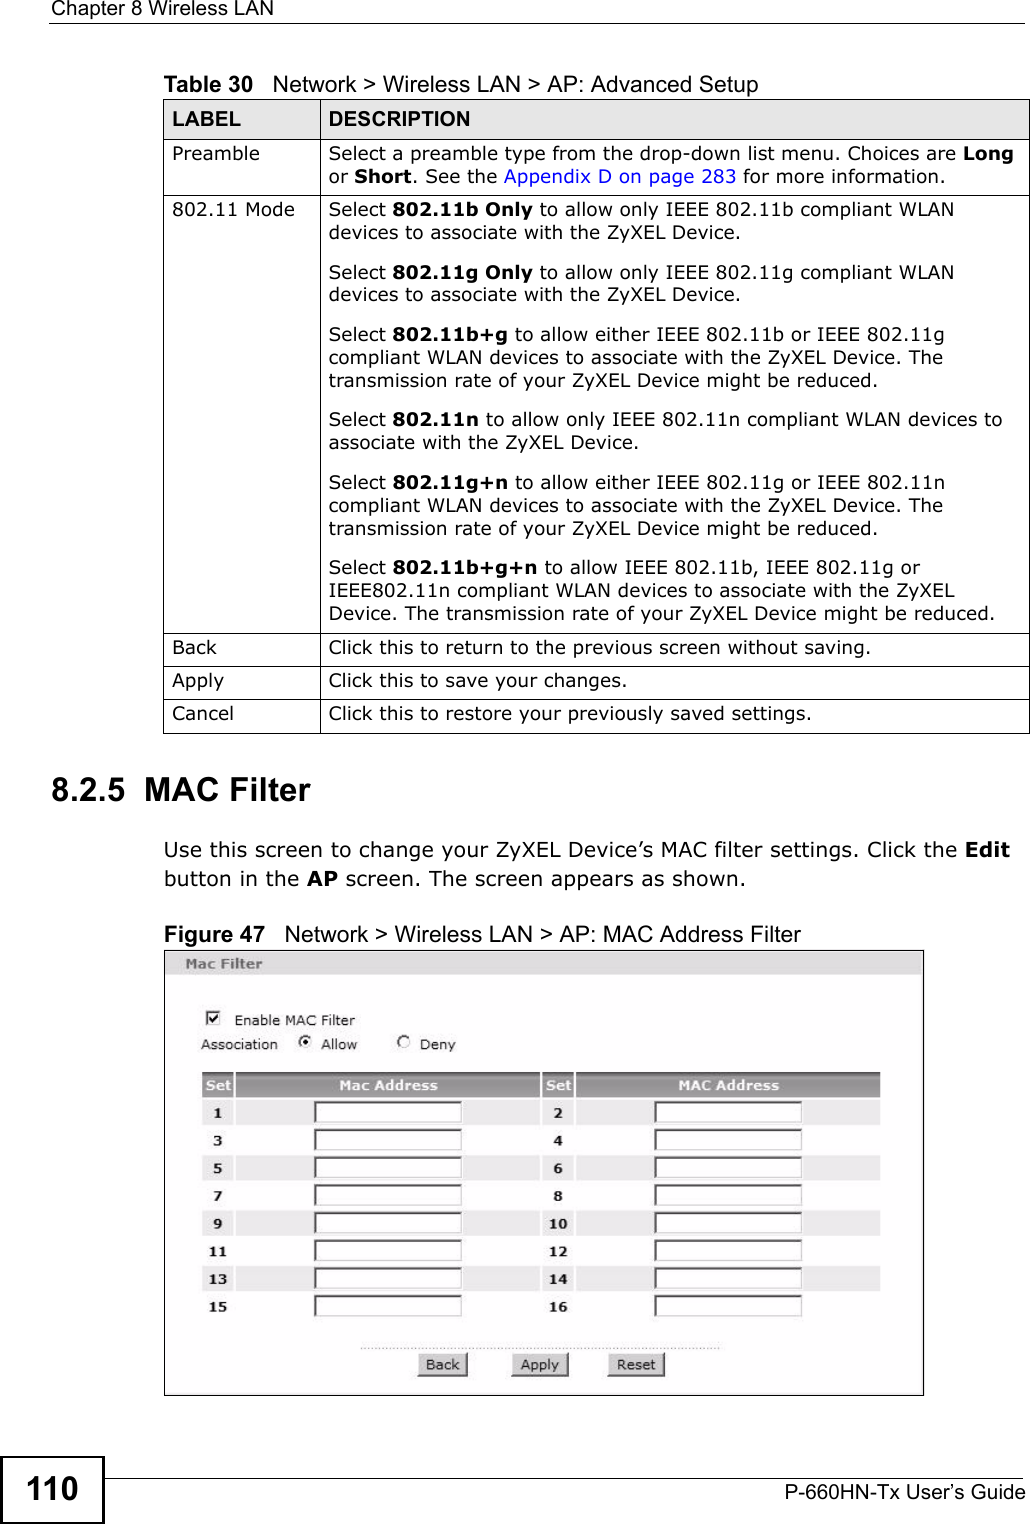 Chapter 8 Wireless LANP-660HN-Tx User’s Guide1108.2.5  MAC Filter    Use this screen to change your ZyXEL Device’s MAC filter settings. Click the Edit button in the AP screen. The screen appears as shown.Figure 47   Network &gt; Wireless LAN &gt; AP: MAC Address FilterPreamble Select a preamble type from the drop-down list menu. Choices are Long or Short. See the Appendix D on page 283 for more information.802.11 Mode Select 802.11b Only to allow only IEEE 802.11b compliant WLAN devices to associate with the ZyXEL Device.Select 802.11g Only to allow only IEEE 802.11g compliant WLAN devices to associate with the ZyXEL Device.Select 802.11b+g to allow either IEEE 802.11b or IEEE 802.11g compliant WLAN devices to associate with the ZyXEL Device. The transmission rate of your ZyXEL Device might be reduced.Select 802.11n to allow only IEEE 802.11n compliant WLAN devices to associate with the ZyXEL Device.Select 802.11g+n to allow either IEEE 802.11g or IEEE 802.11n compliant WLAN devices to associate with the ZyXEL Device. The transmission rate of your ZyXEL Device might be reduced.Select 802.11b+g+n to allow IEEE 802.11b, IEEE 802.11g or IEEE802.11n compliant WLAN devices to associate with the ZyXEL Device. The transmission rate of your ZyXEL Device might be reduced.Back Click this to return to the previous screen without saving.Apply Click this to save your changes.Cancel Click this to restore your previously saved settings.Table 30   Network &gt; Wireless LAN &gt; AP: Advanced SetupLABEL DESCRIPTION